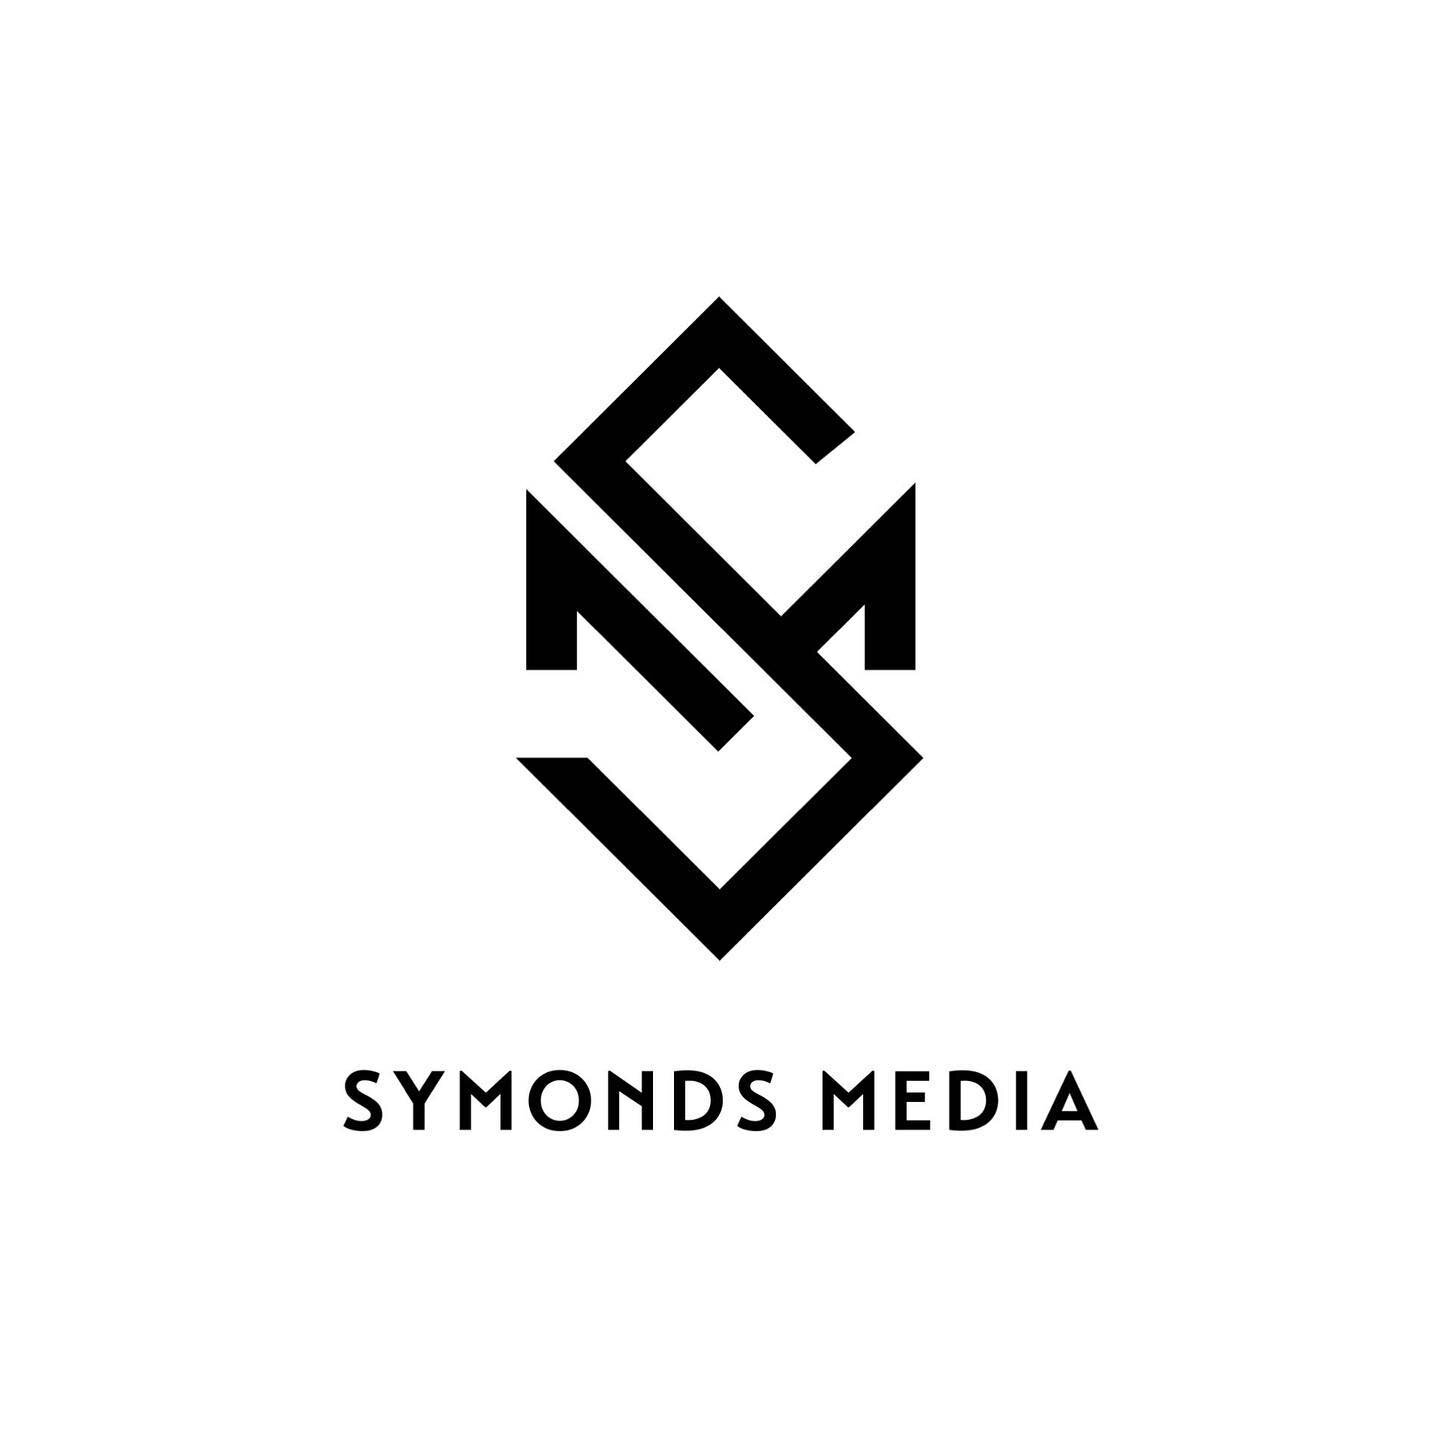 New logo for Symonds Media!! I designed the logo on a scratch sheet of paper and sent it over to @coolstuffbyaustin where he did his magic with implementation and brought this logo to life. 

The thought behind the logo was that i just want something